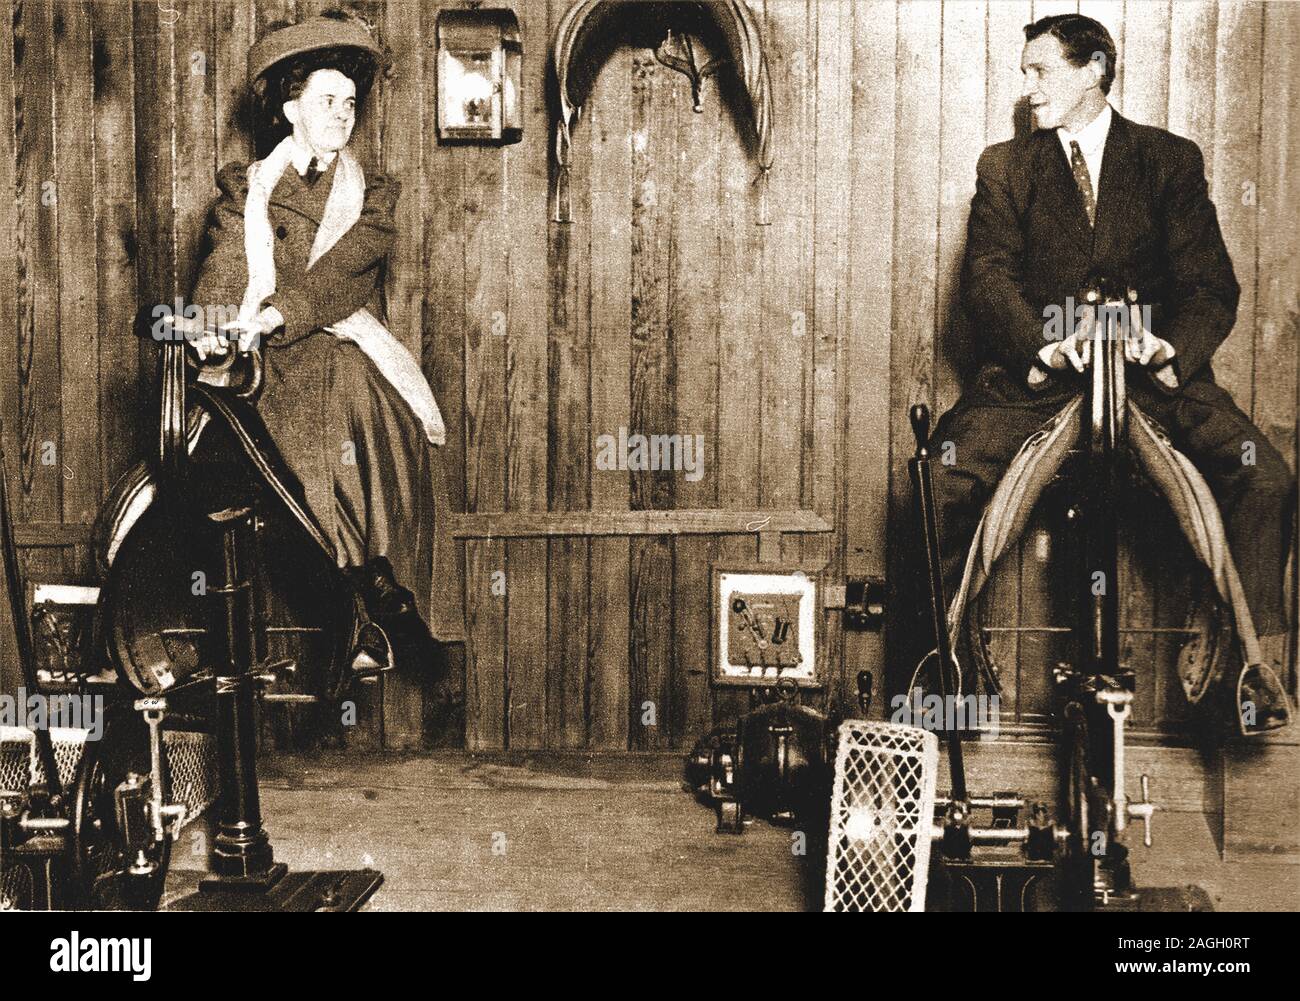 A 1912 photograph of a man and woman in formal dress riding 'mechanical horses', said to be in the gym on the  ill fated  luxury liner Titanic. Stock Photo